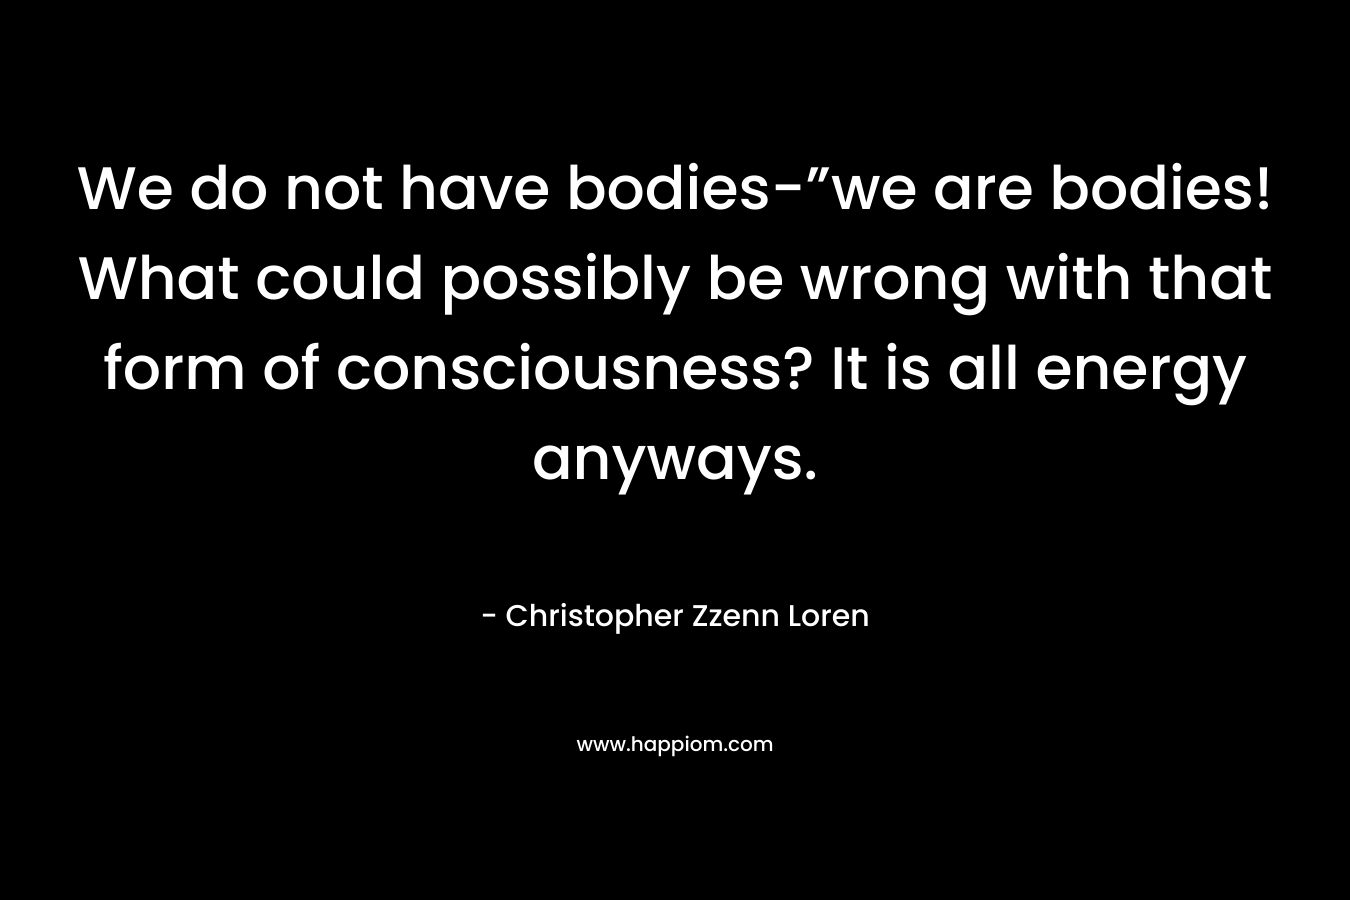 We do not have bodies-”we are bodies! What could possibly be wrong with that form of consciousness? It is all energy anyways. – Christopher Zzenn Loren